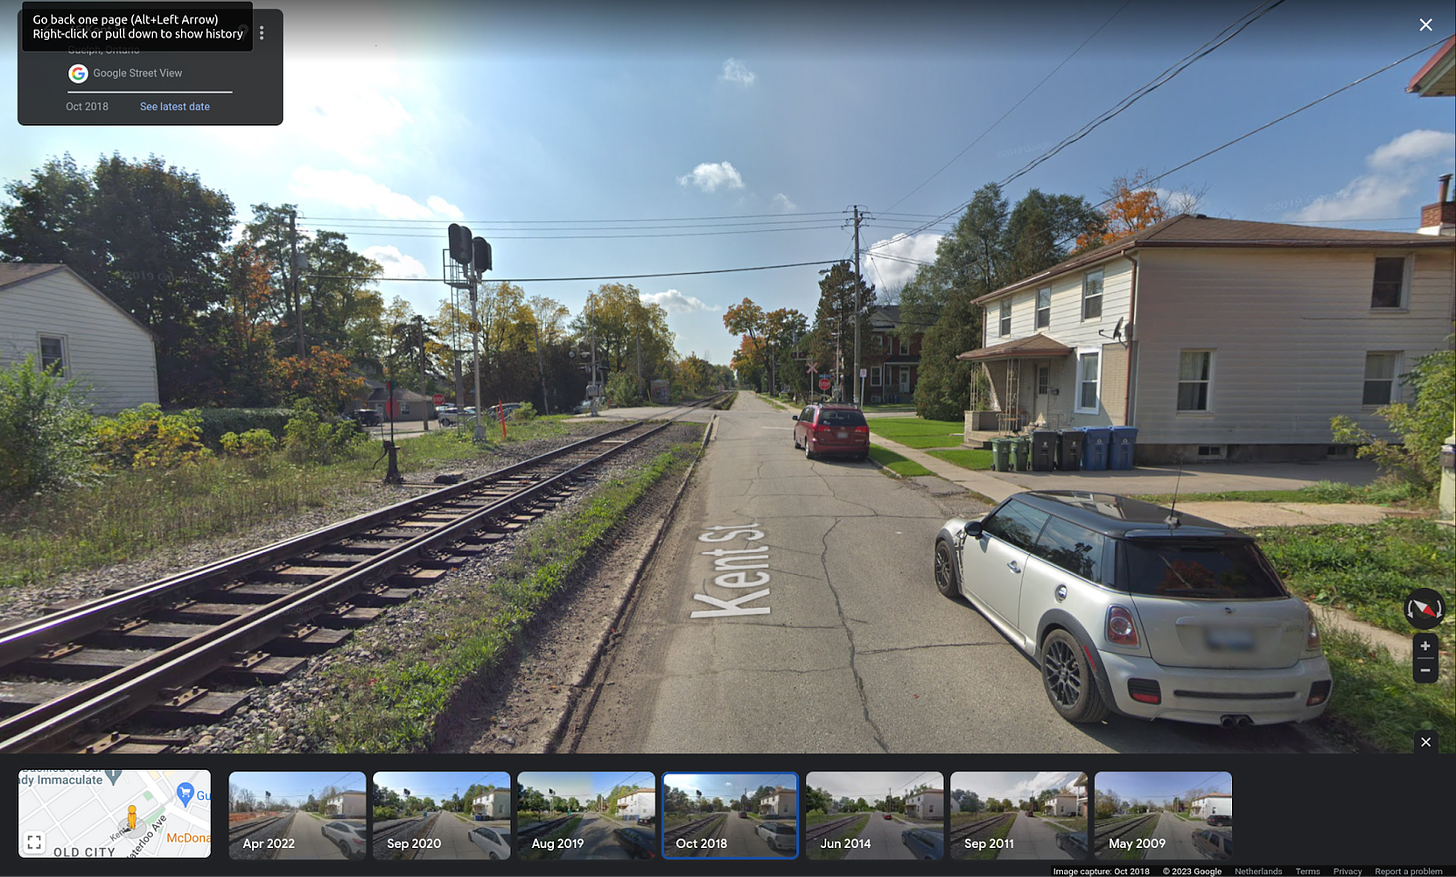 A residential street with houses on one side and railway tracks where you might find a sidewalk on the other side.